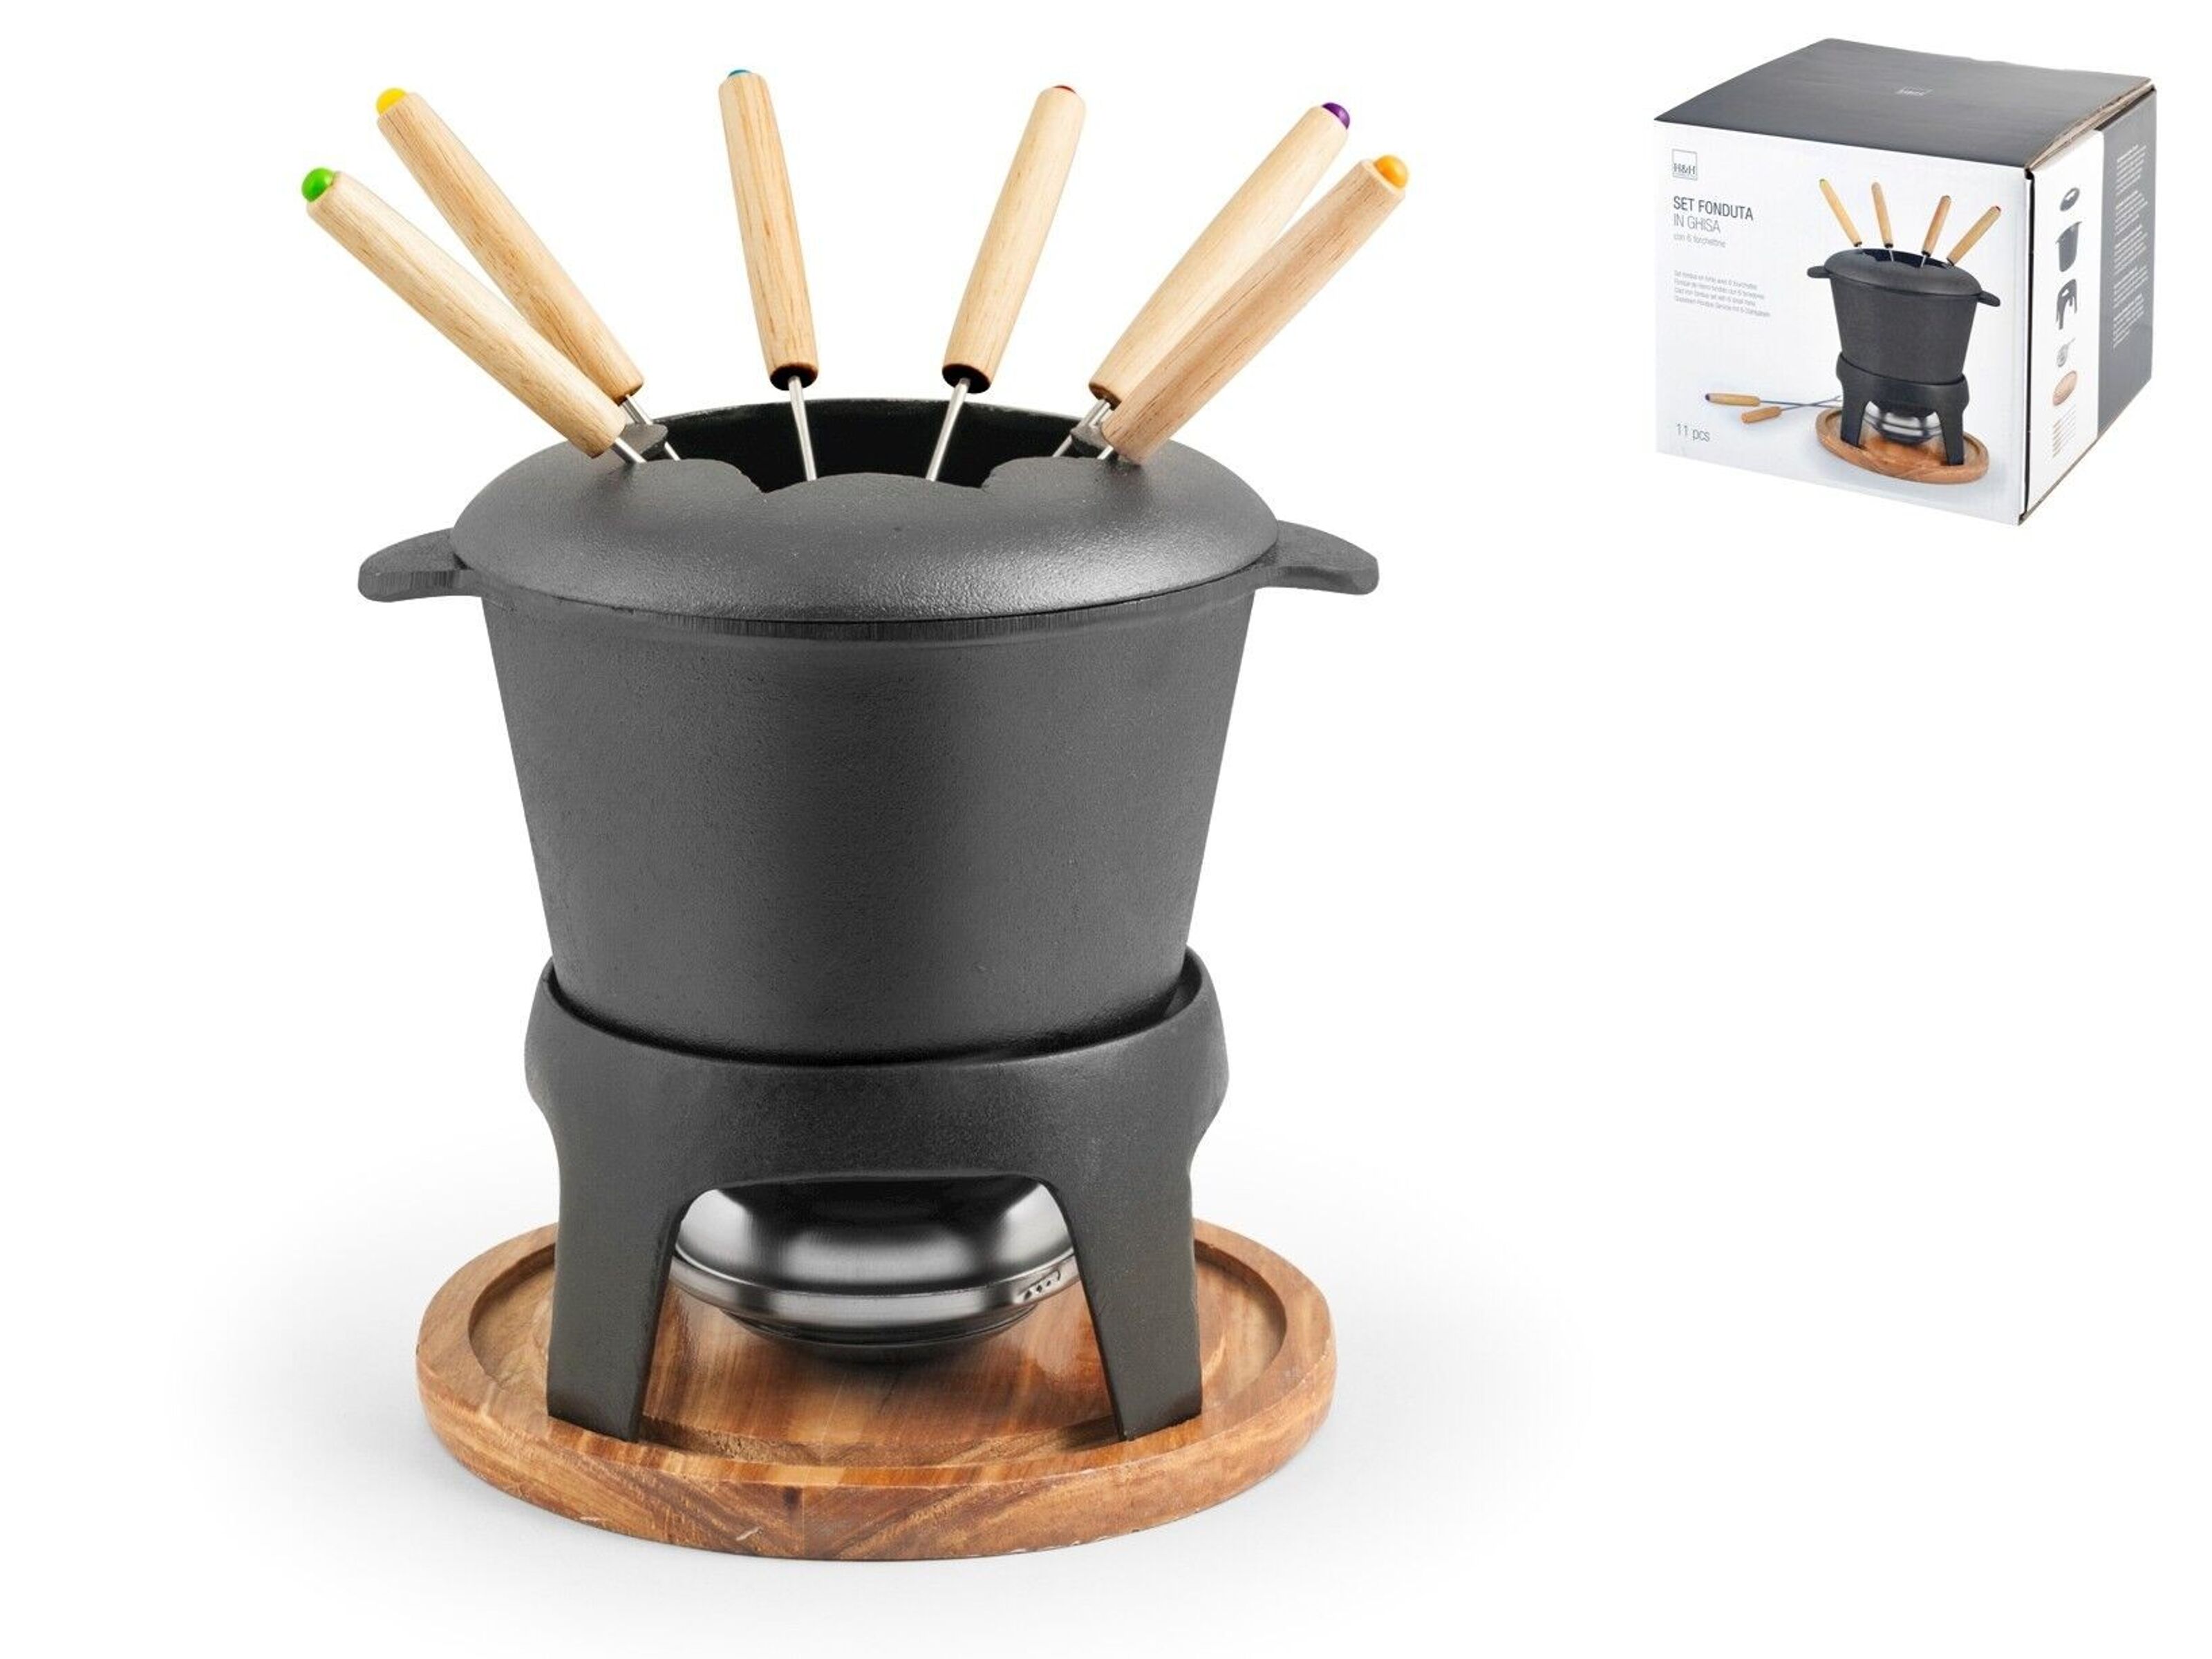 11-piece forks stove; wooden 1 wholesale in Buy 21x16x10 fondue 6 paste cm stainless Consisting h with fuel with saucepan 1 steel iron of: with iron base. set wooden cast cast handle;